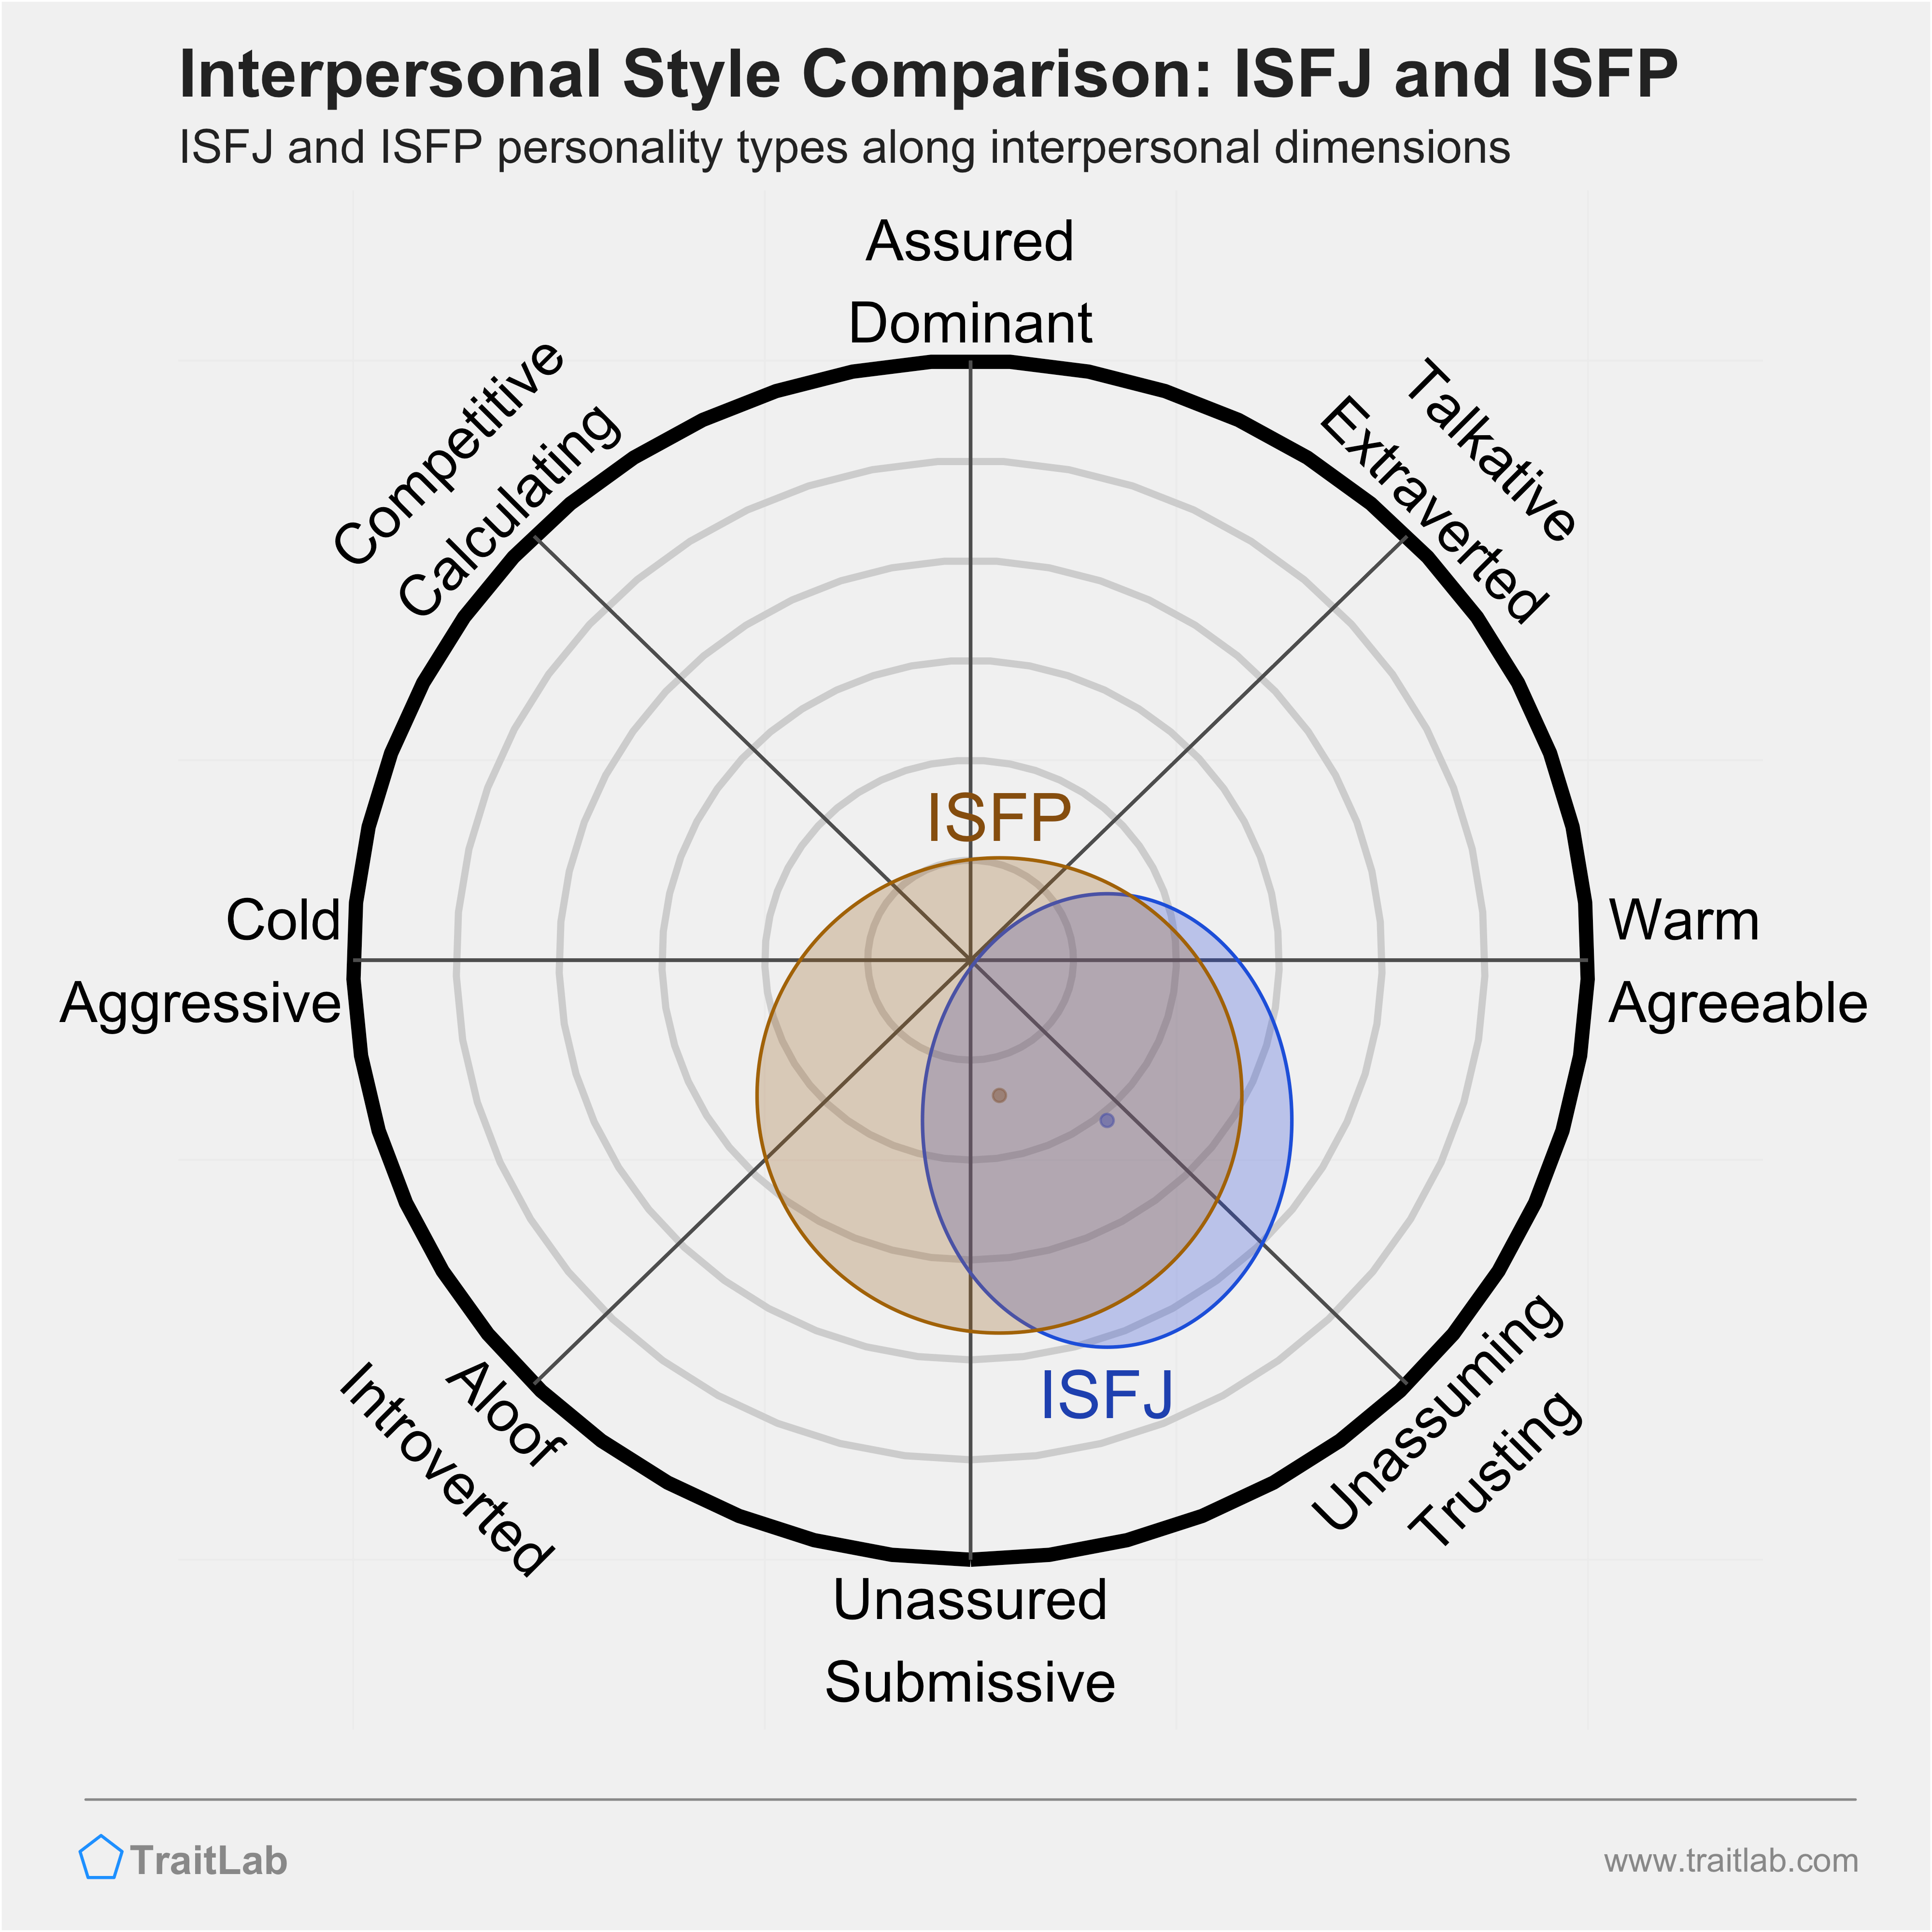 ISFJ and ISFP comparison across interpersonal dimensions